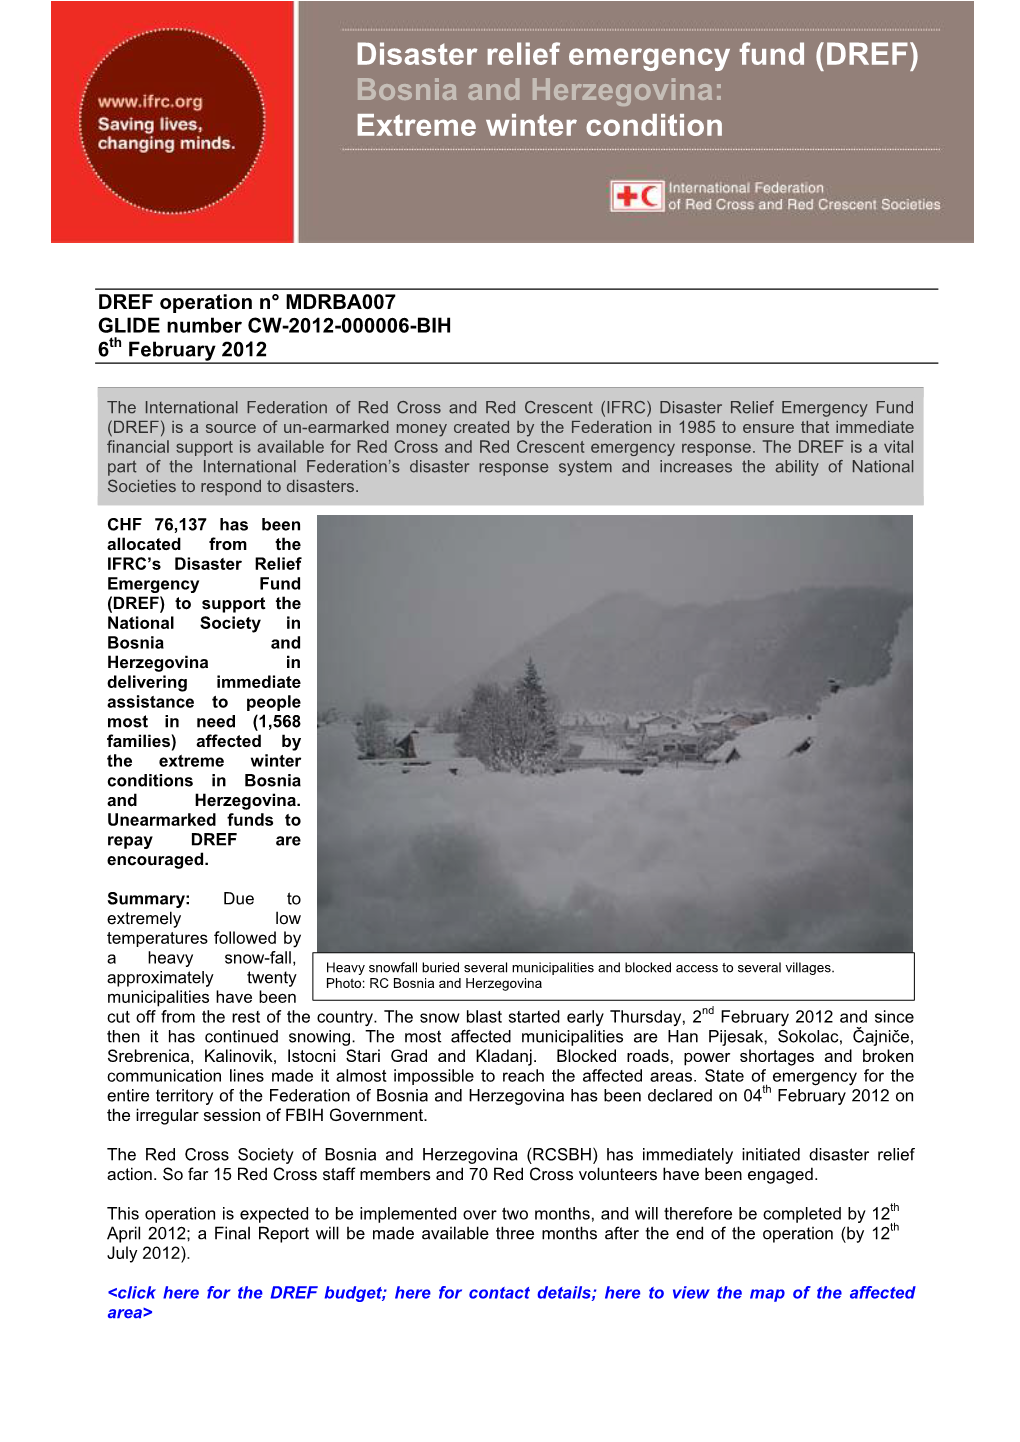 Disaster Relief Emergency Fund (DREF) Bosnia and Herzegovina: Extreme Winter Condition